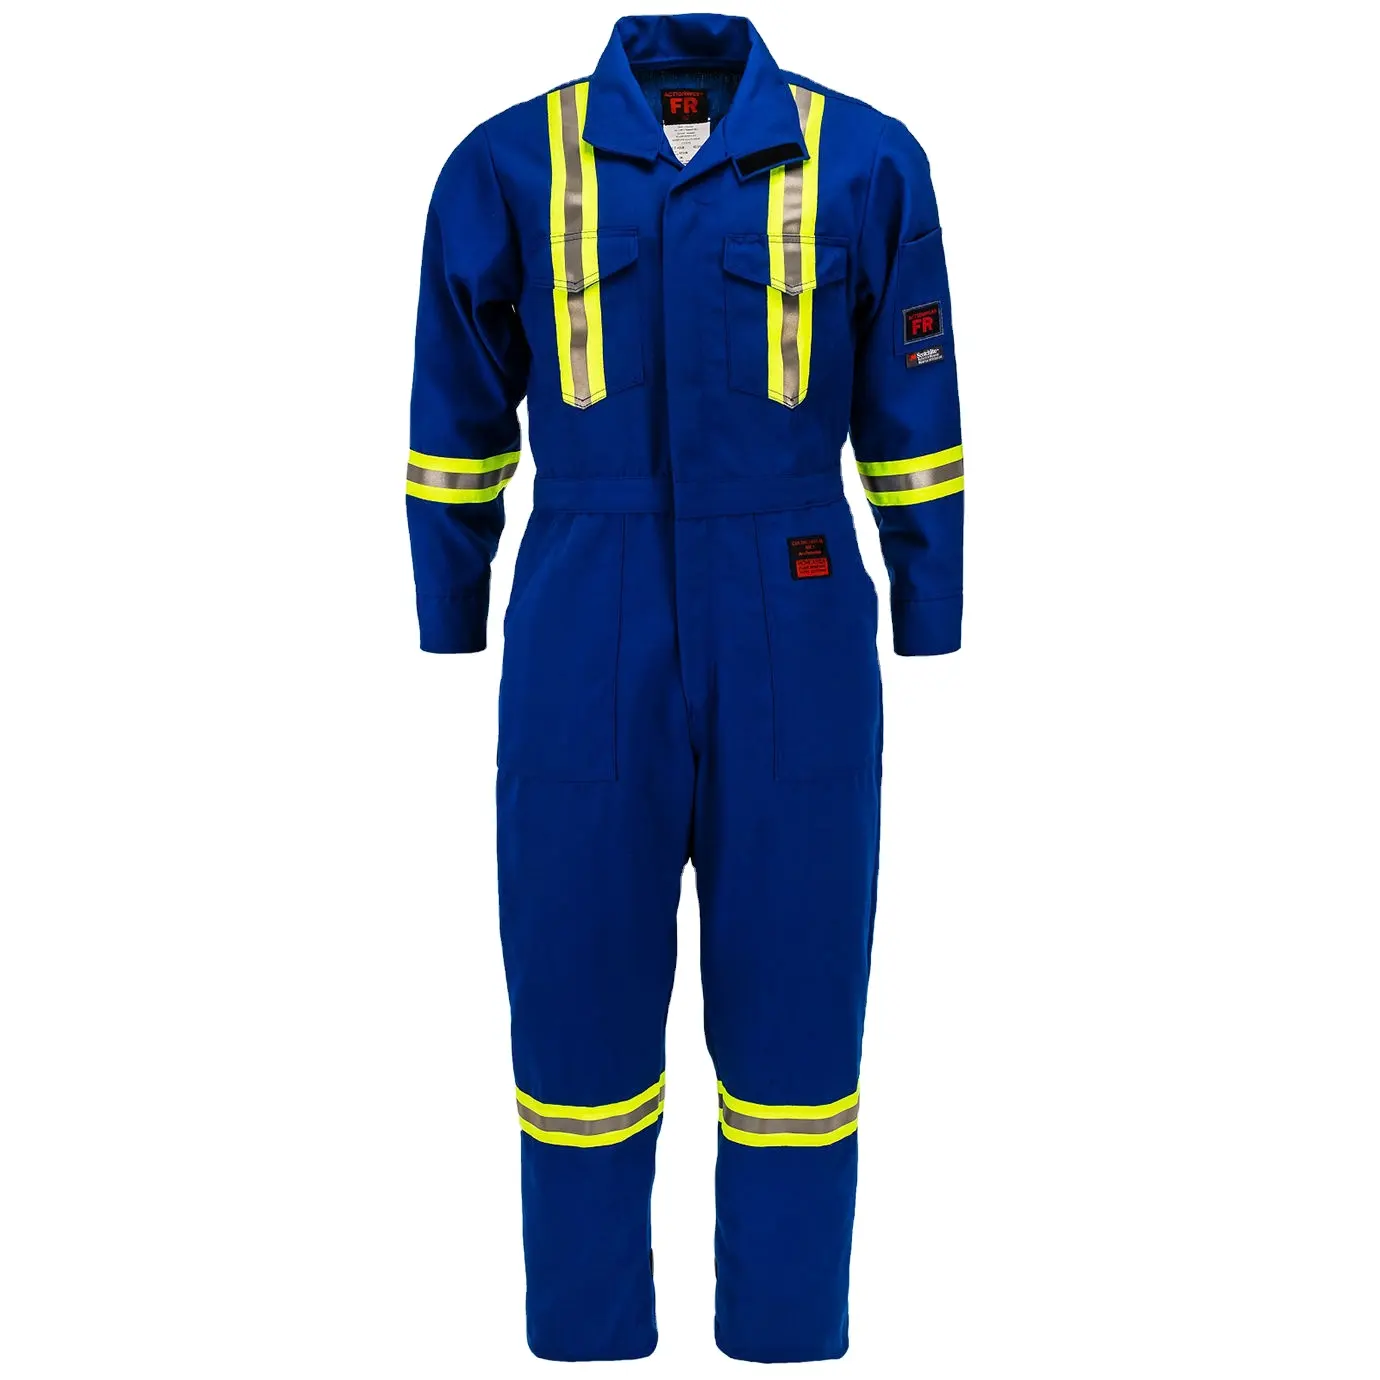 Aramid Coveralls with visible tapes for labor